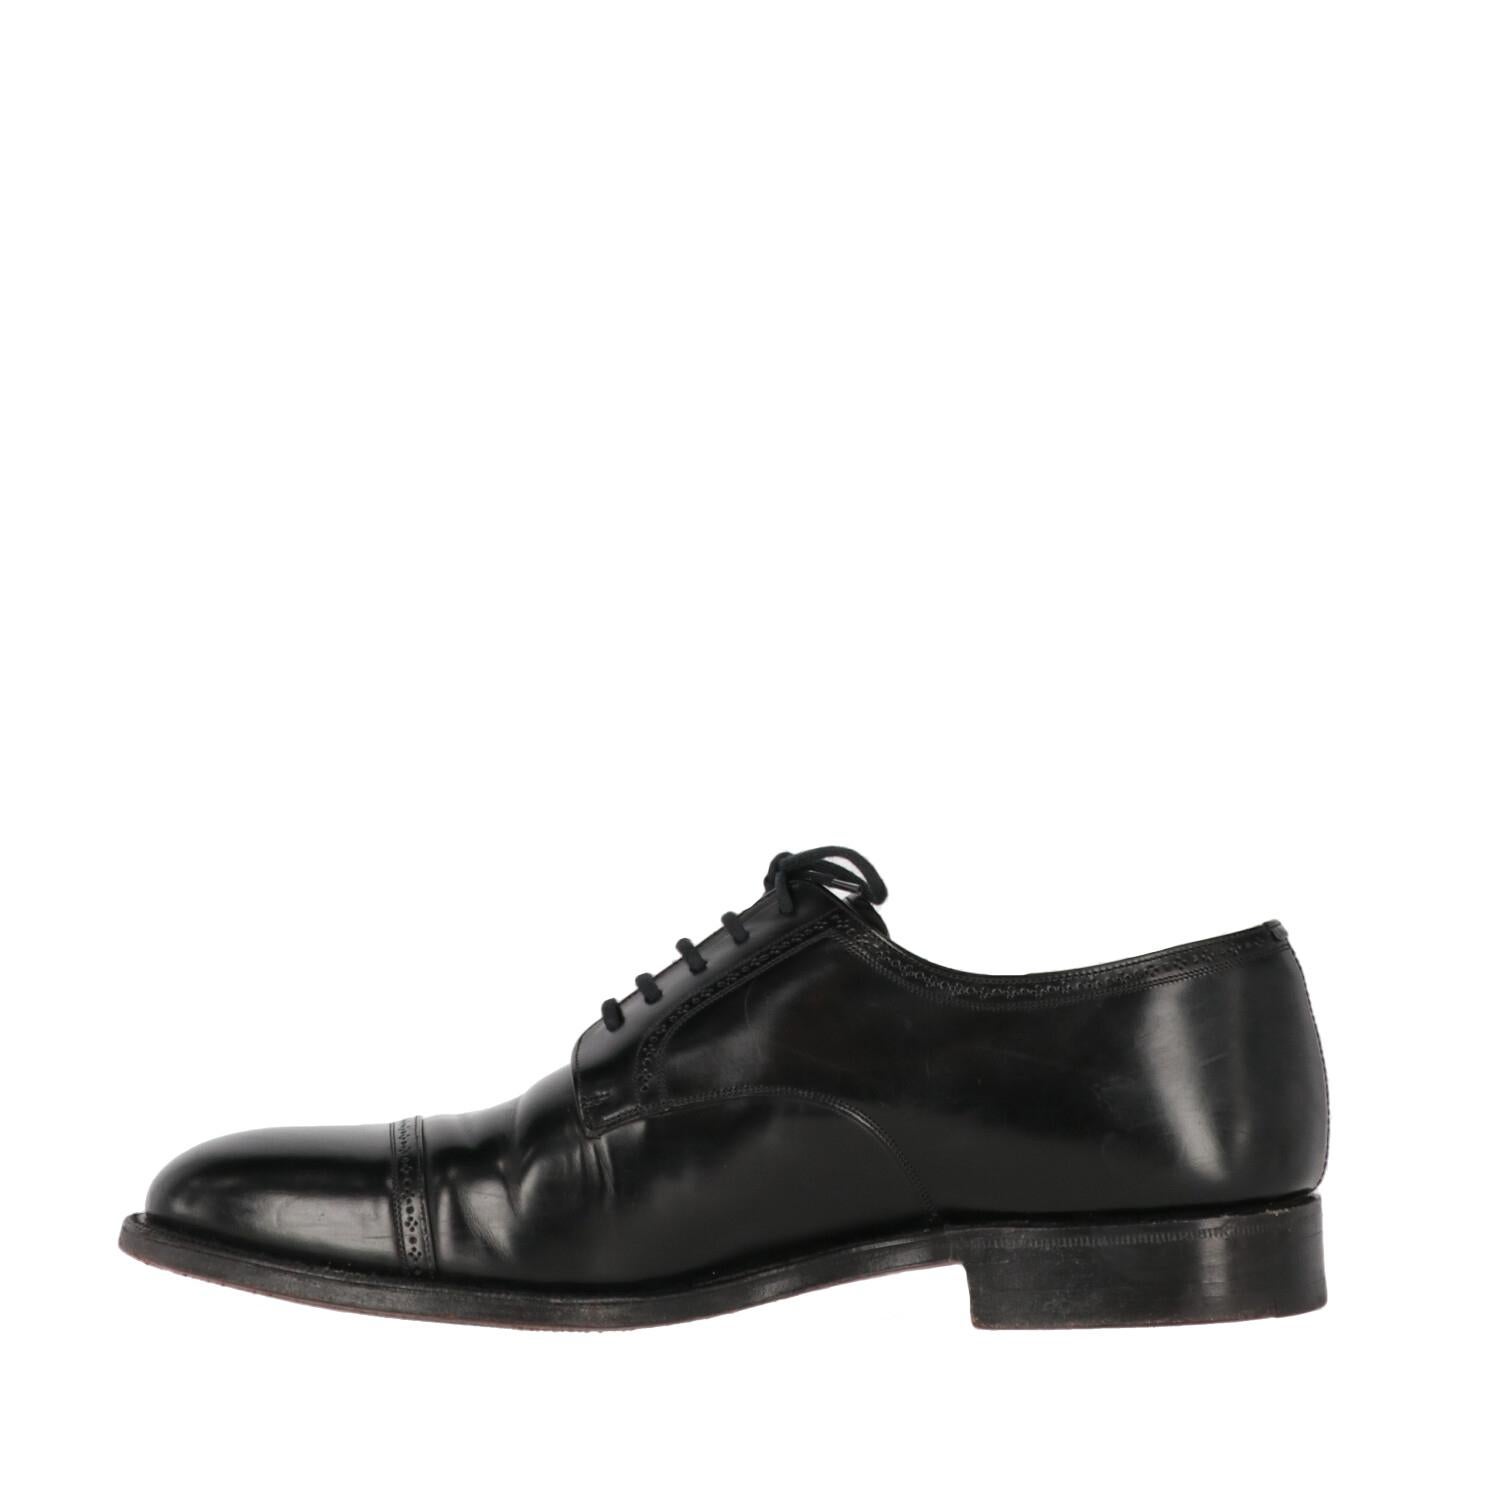 Church's genuine black leather classic lace-up shoe with tone-on-tone laces, brogue decorations and round toe. Regular fit.

The item shows scratches and some wrinkles on the leather, as shown in the pictures.
Years: 1990s

Made in England

Size: 10